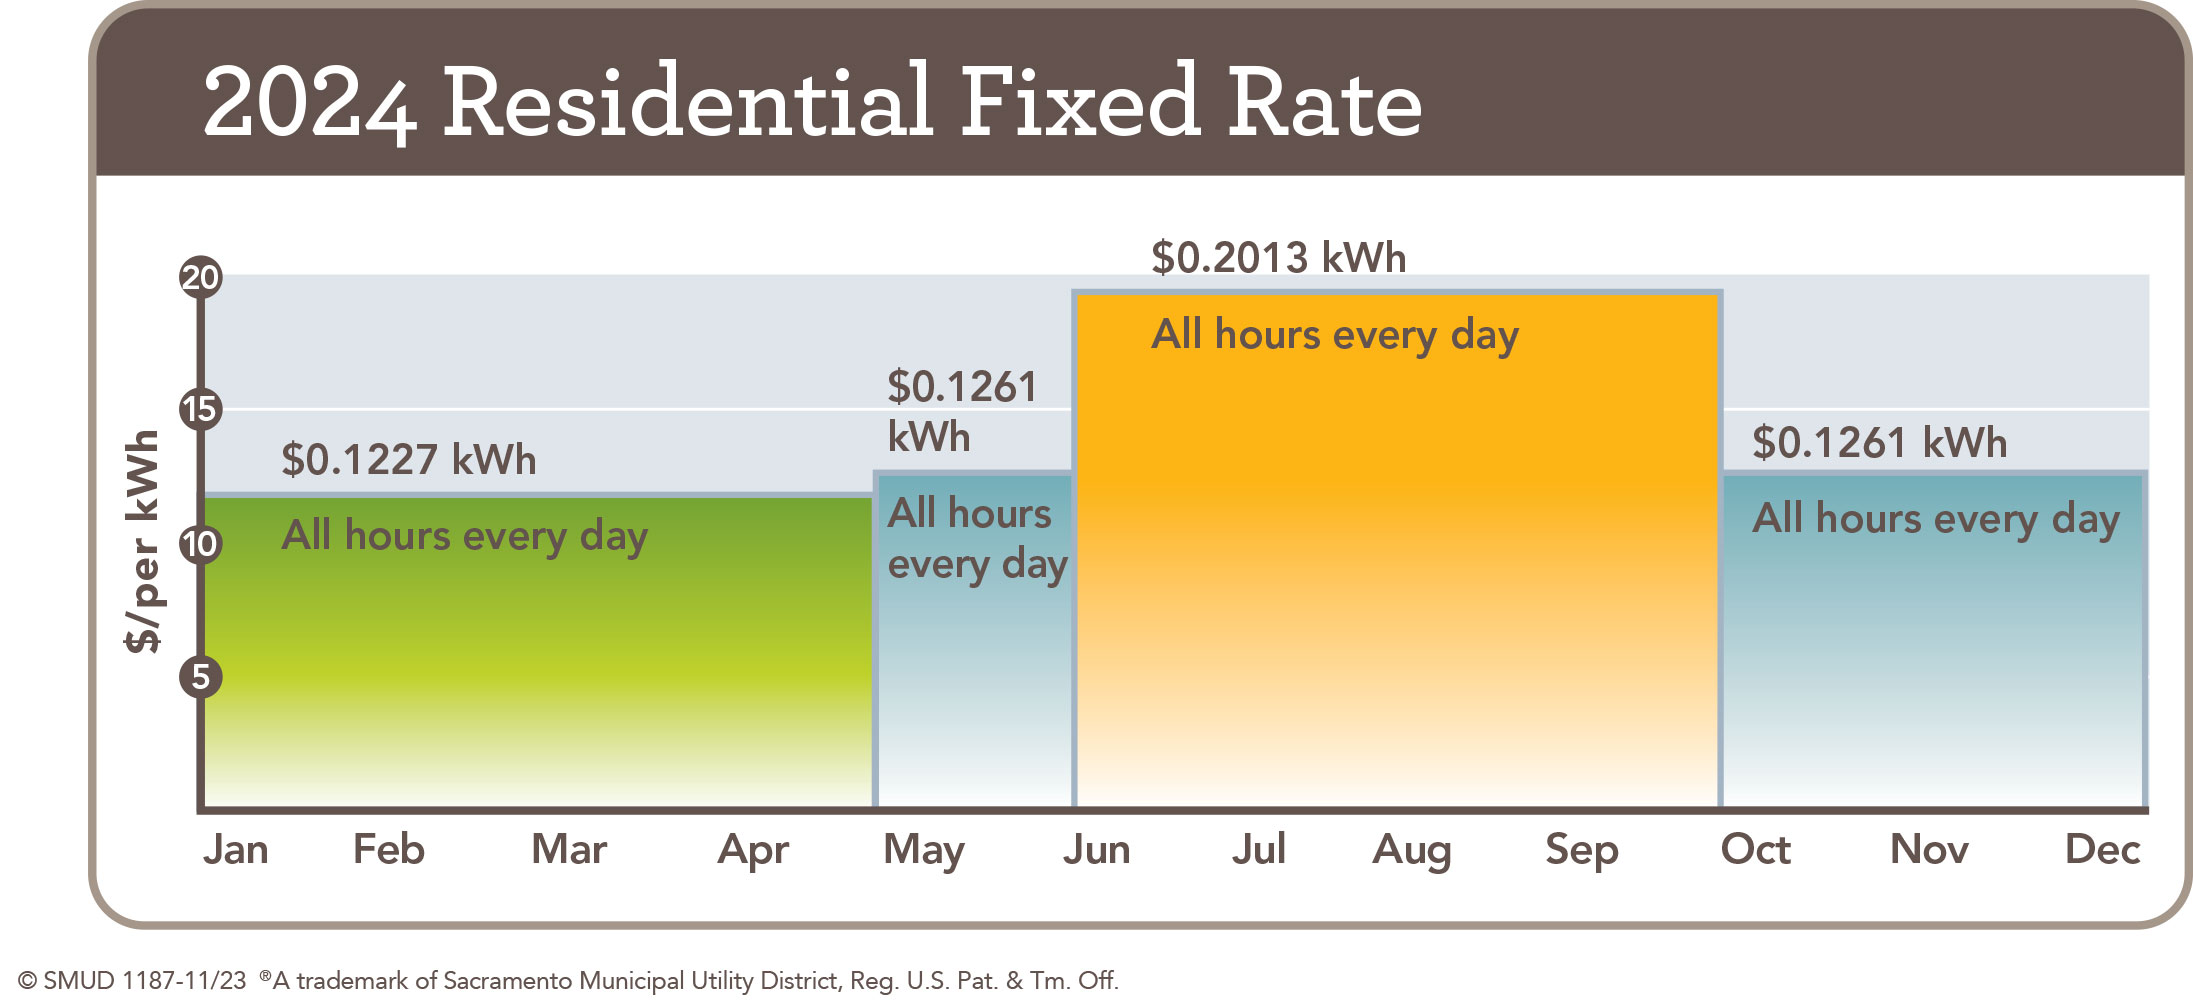 2024 residential Fixed Rate chart for all hours every day. January - April: $0.1227 kWh; May: $0.1261 kWh ; June-September: $0.2013 kWh; October - December: $0.1261 kWh.